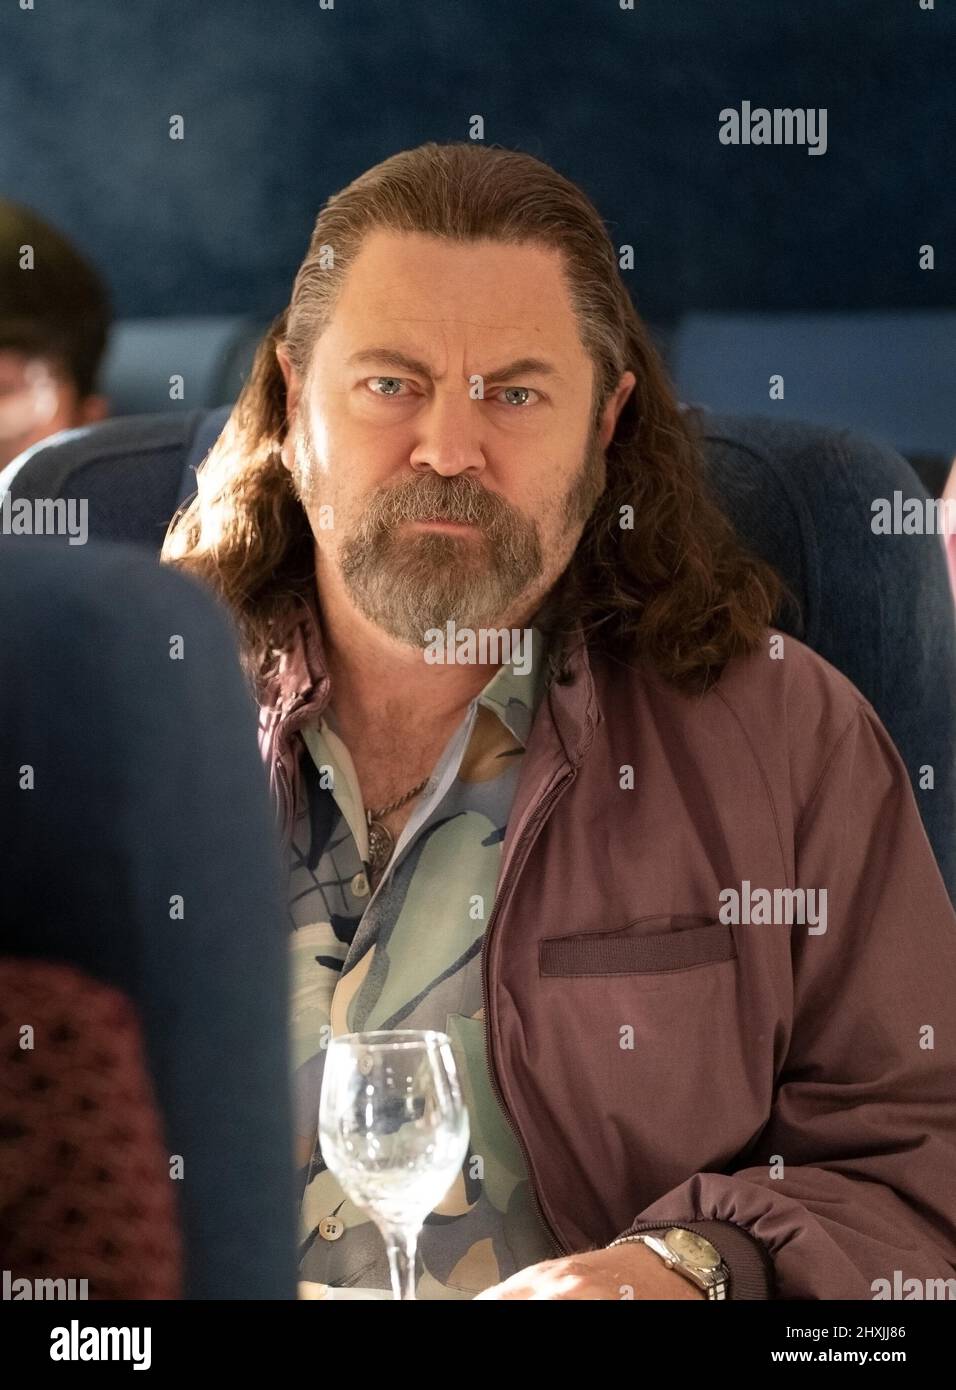 NICK OFFERMAN in PAM & TOMMY (2022), directed by CRAIG GILLESPIE and HANNAH FIDELL. Credit: ANNAPURNA PICTURES / Album Stock Photo